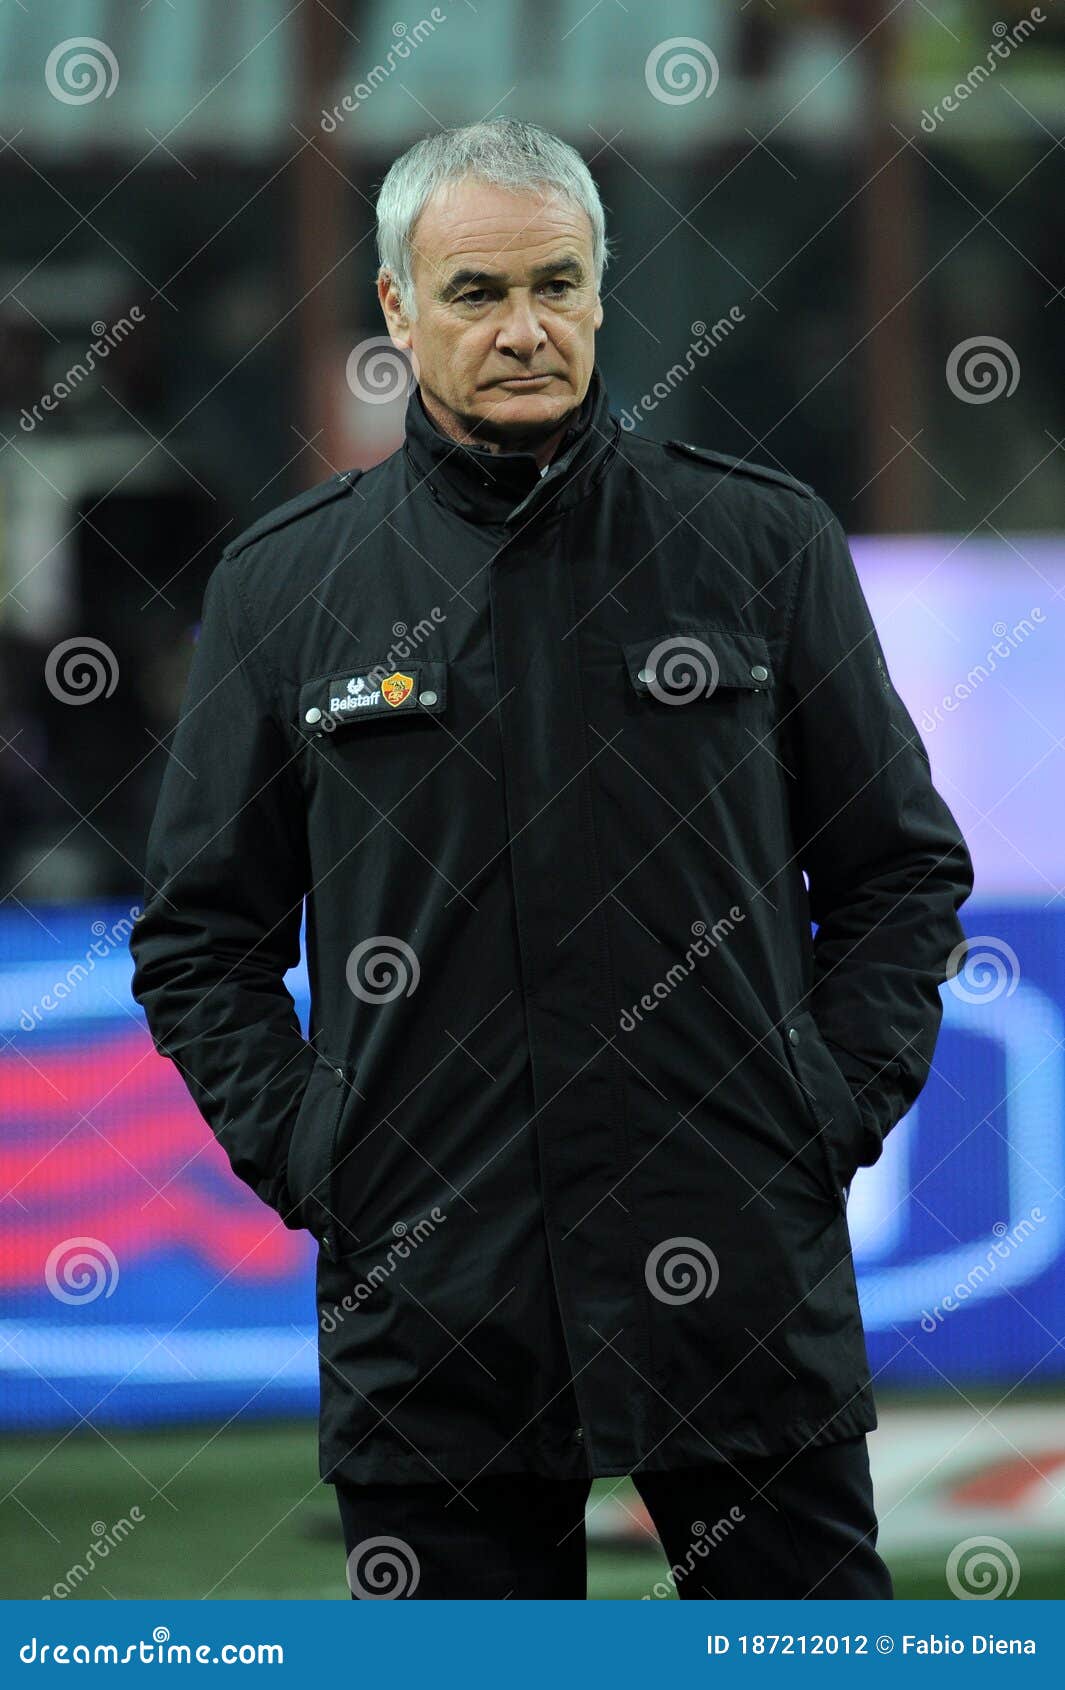 The Roma Coach Claudio Ranieri before the Match Editorial Photography -  Image of playing, 20102011: 187212012